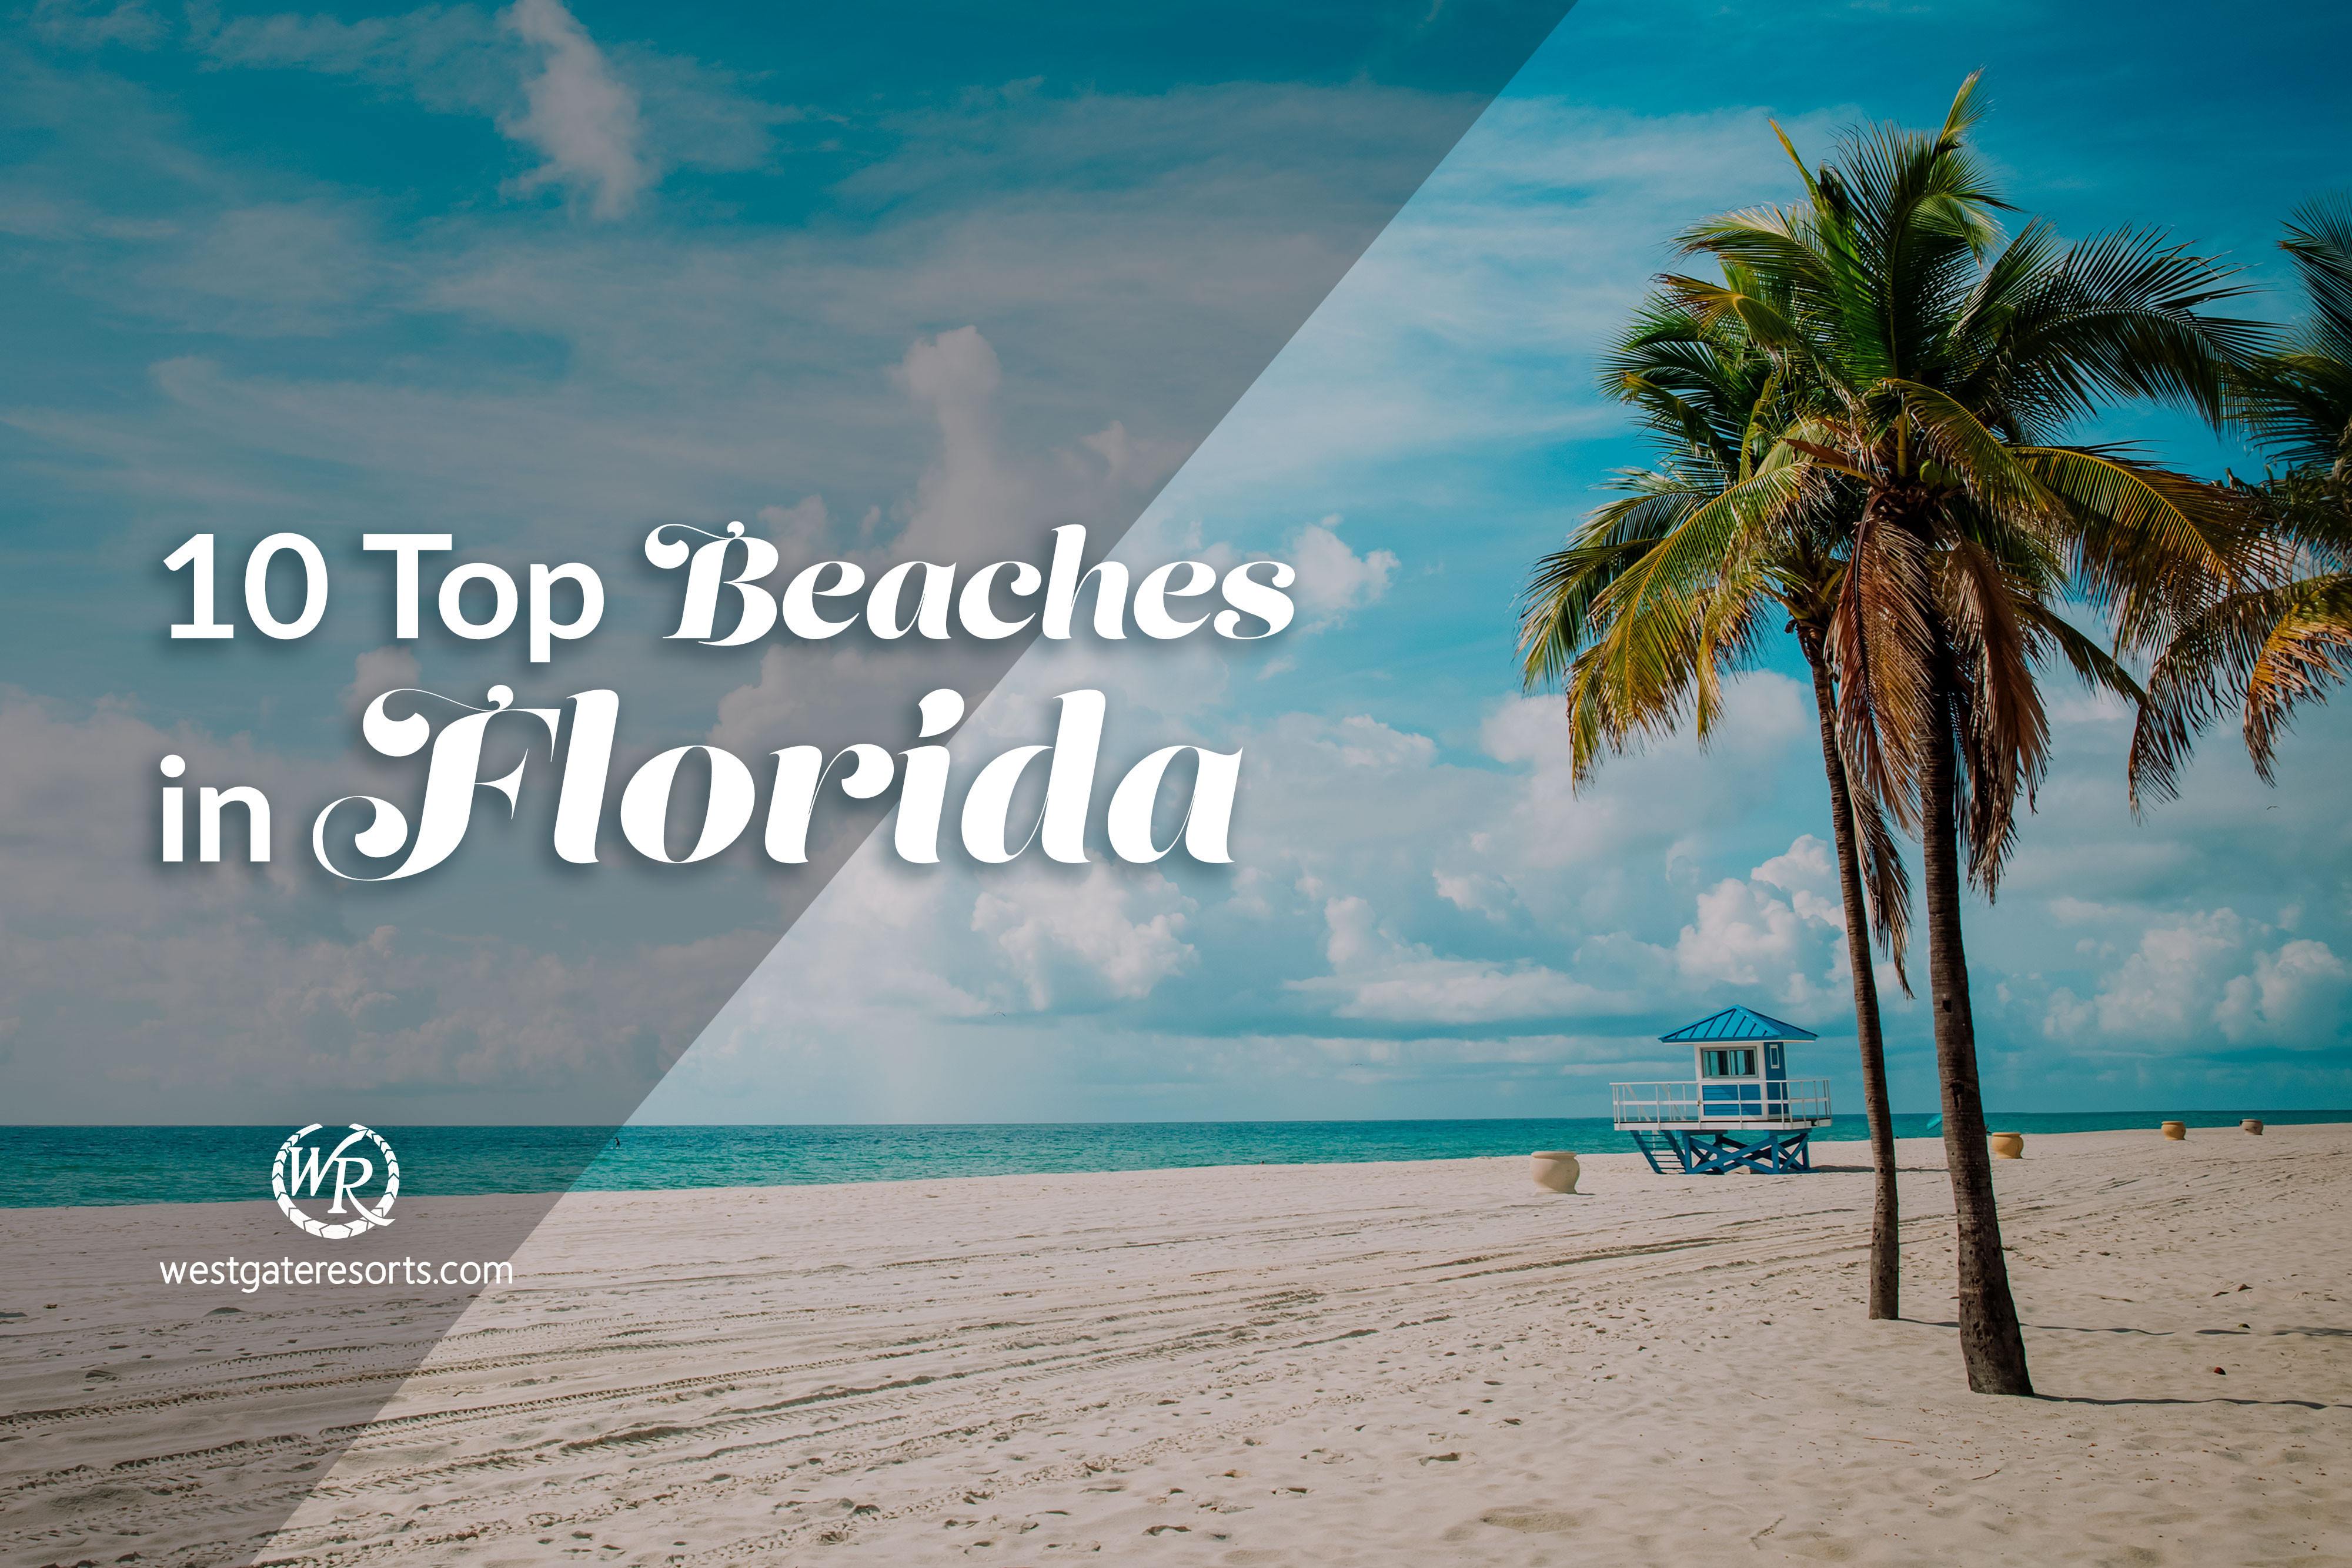 The 10 Top Beaches in Florida